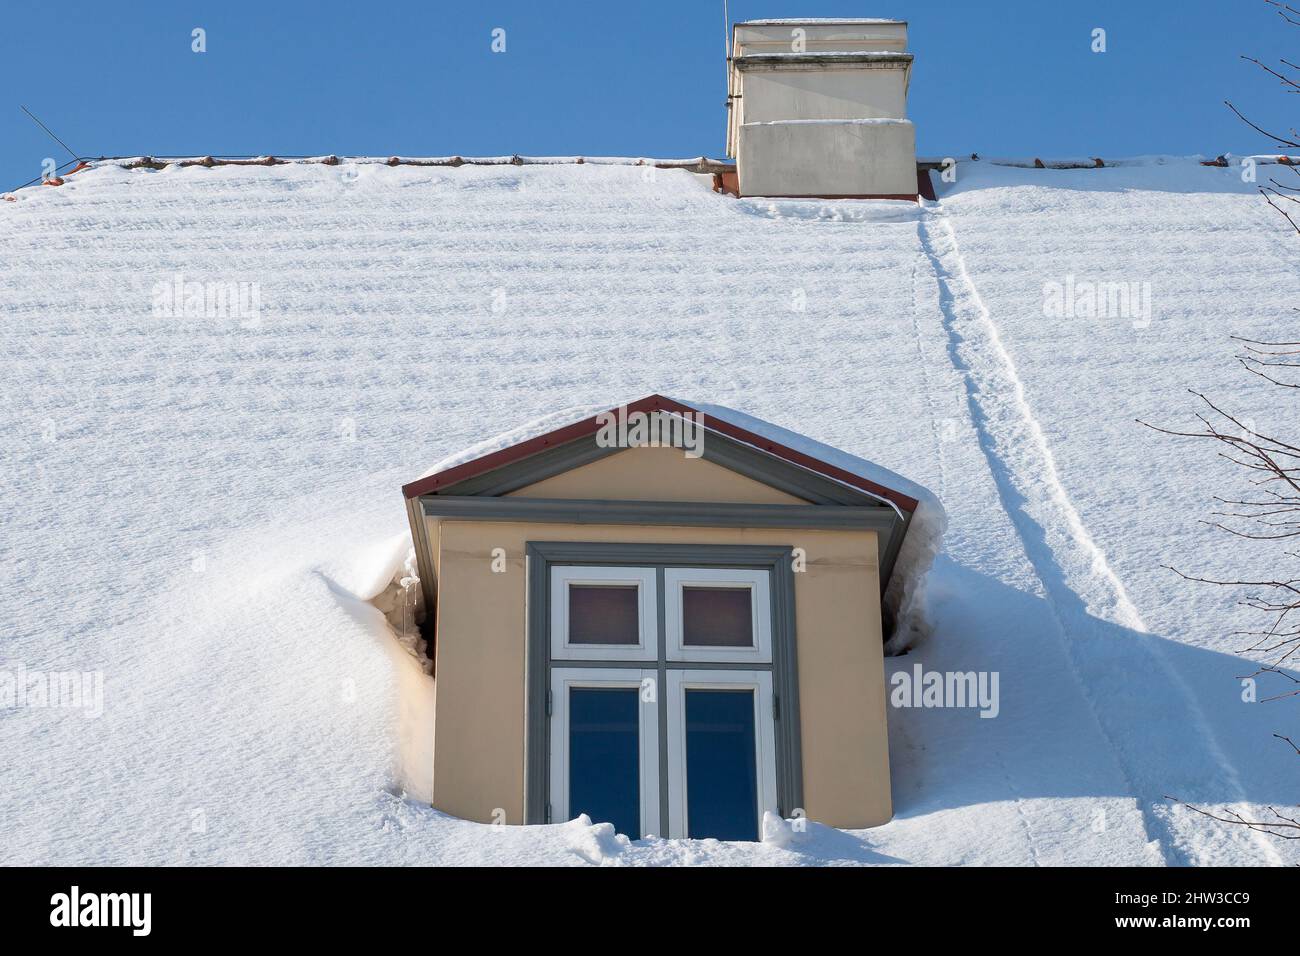 snow-covered house roof Stock Photo